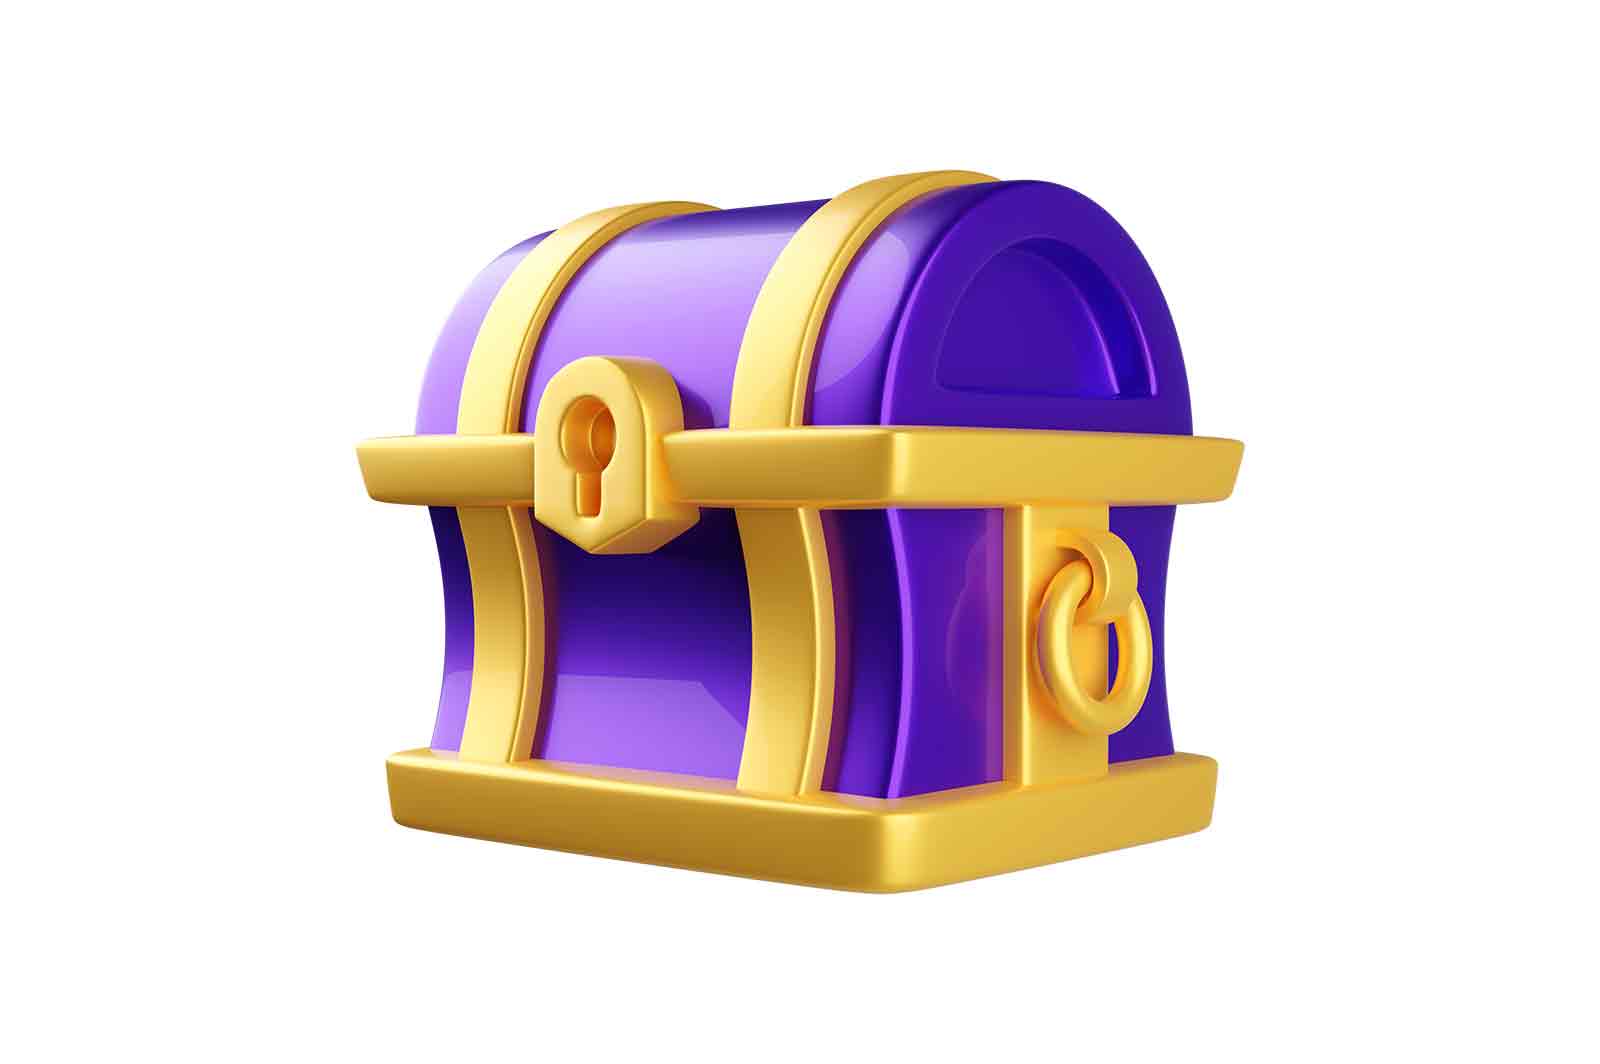 Purple and gold treasure chest, 3d rendered illustration. Symbol of wealth, mystery, or adventure.